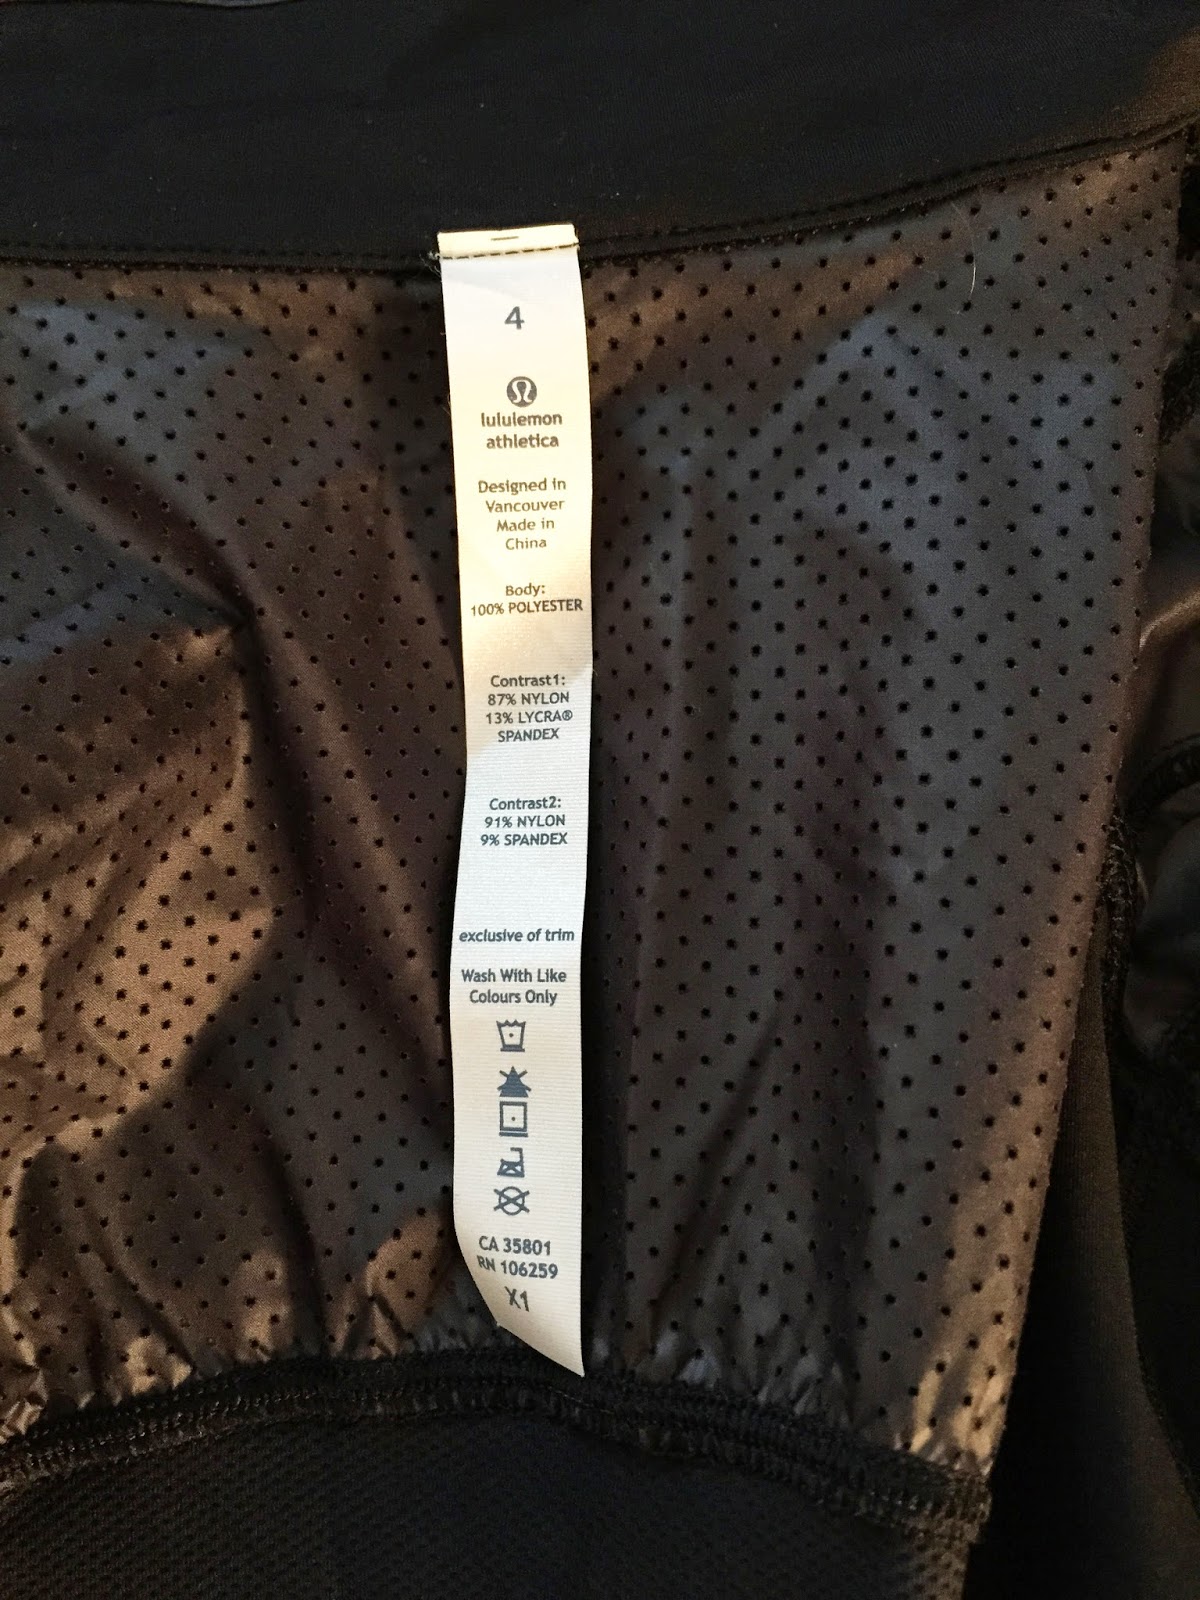 How To Remove Lululemon Security Tag: A Step-by-Step Guide